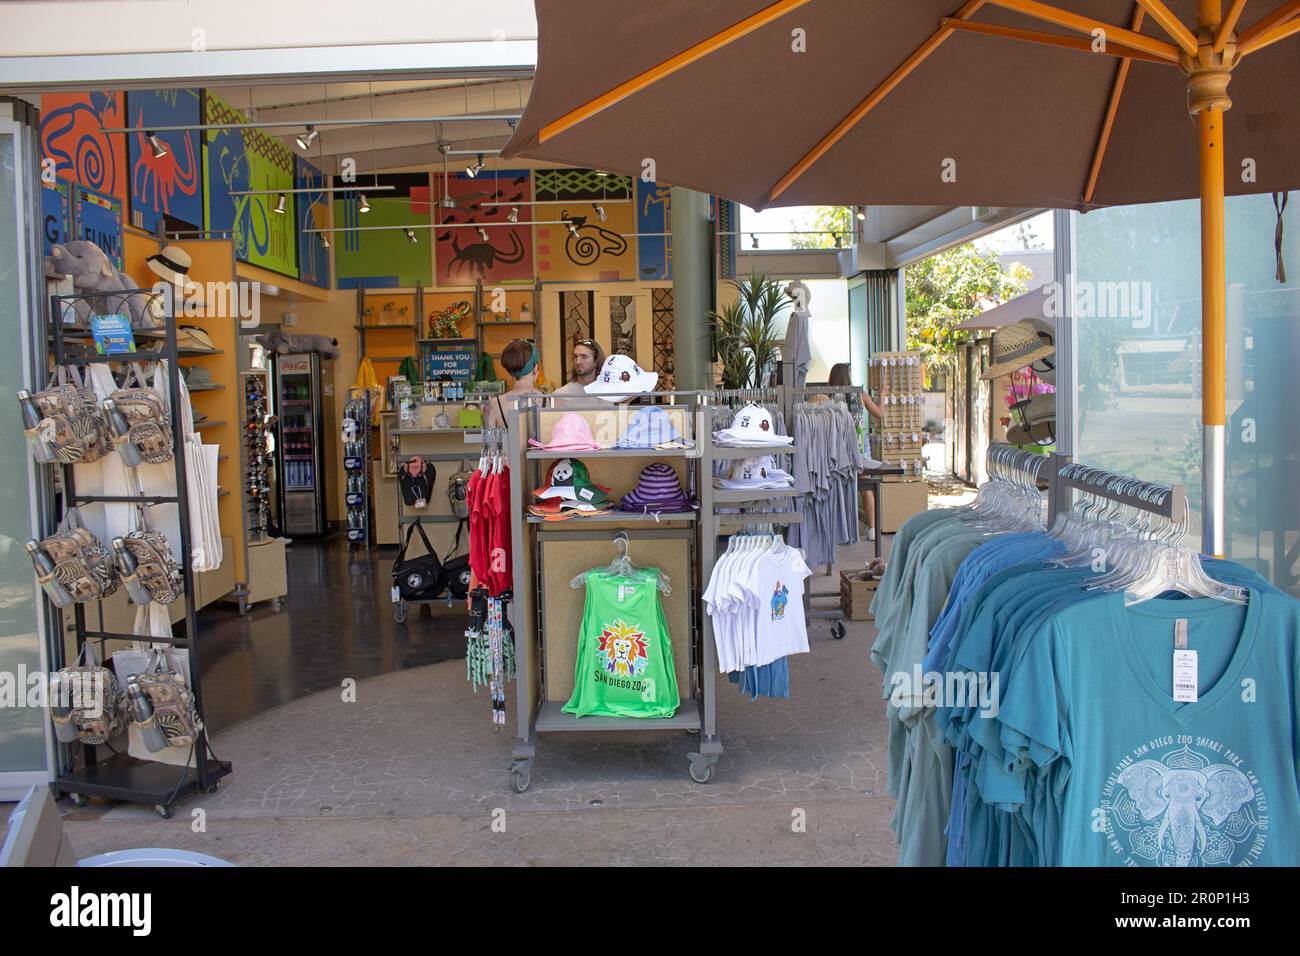 San Diego, California, United States - 09-23-2021: A view of an open gift shop seen at the San Diego Zoo. Stock Photo